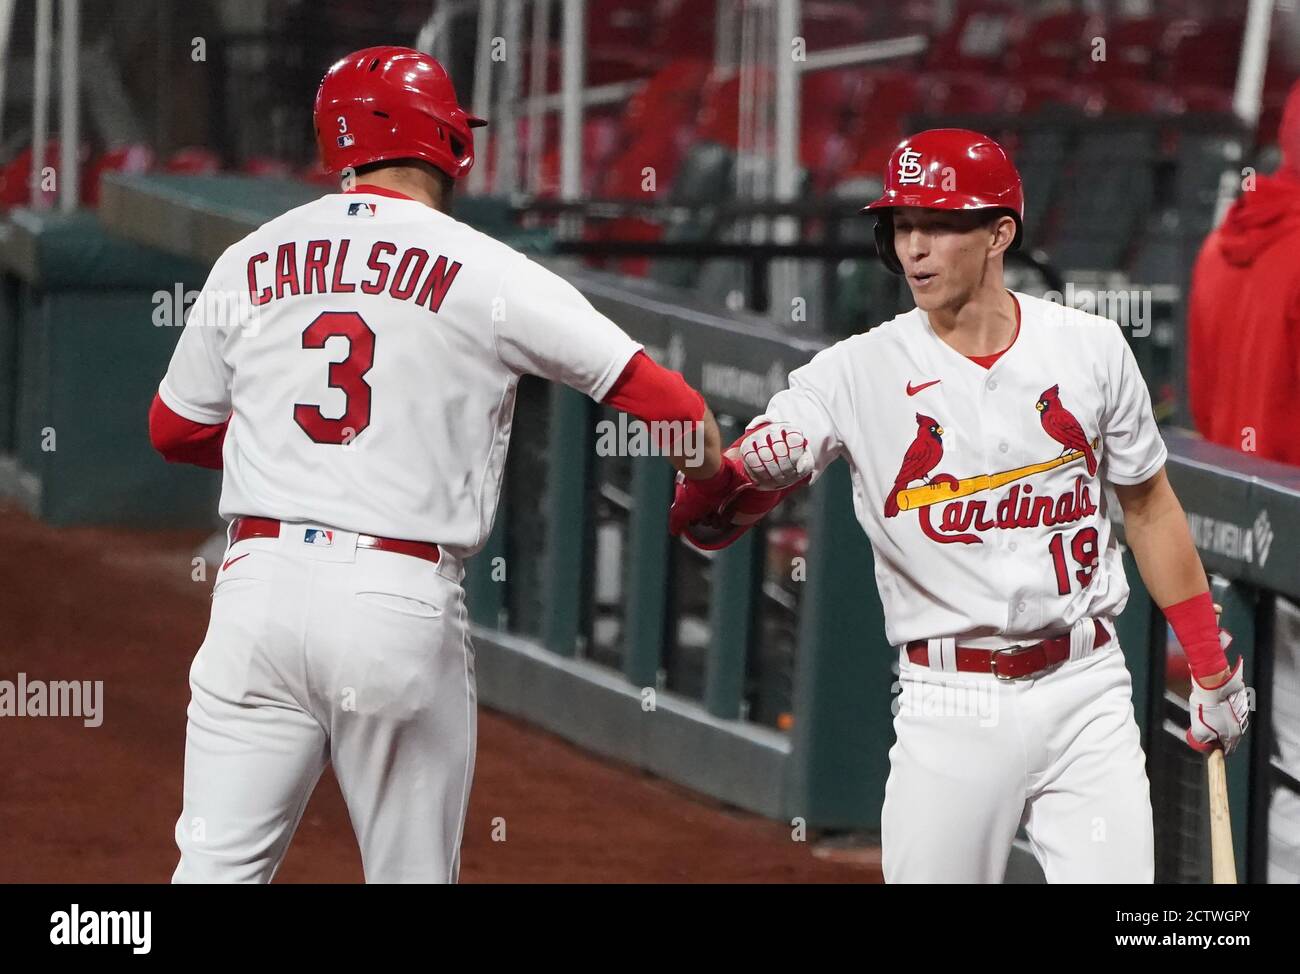 Download Dylan Carlson - Promising Talent of St. Louis Cardinals  Wallpaper